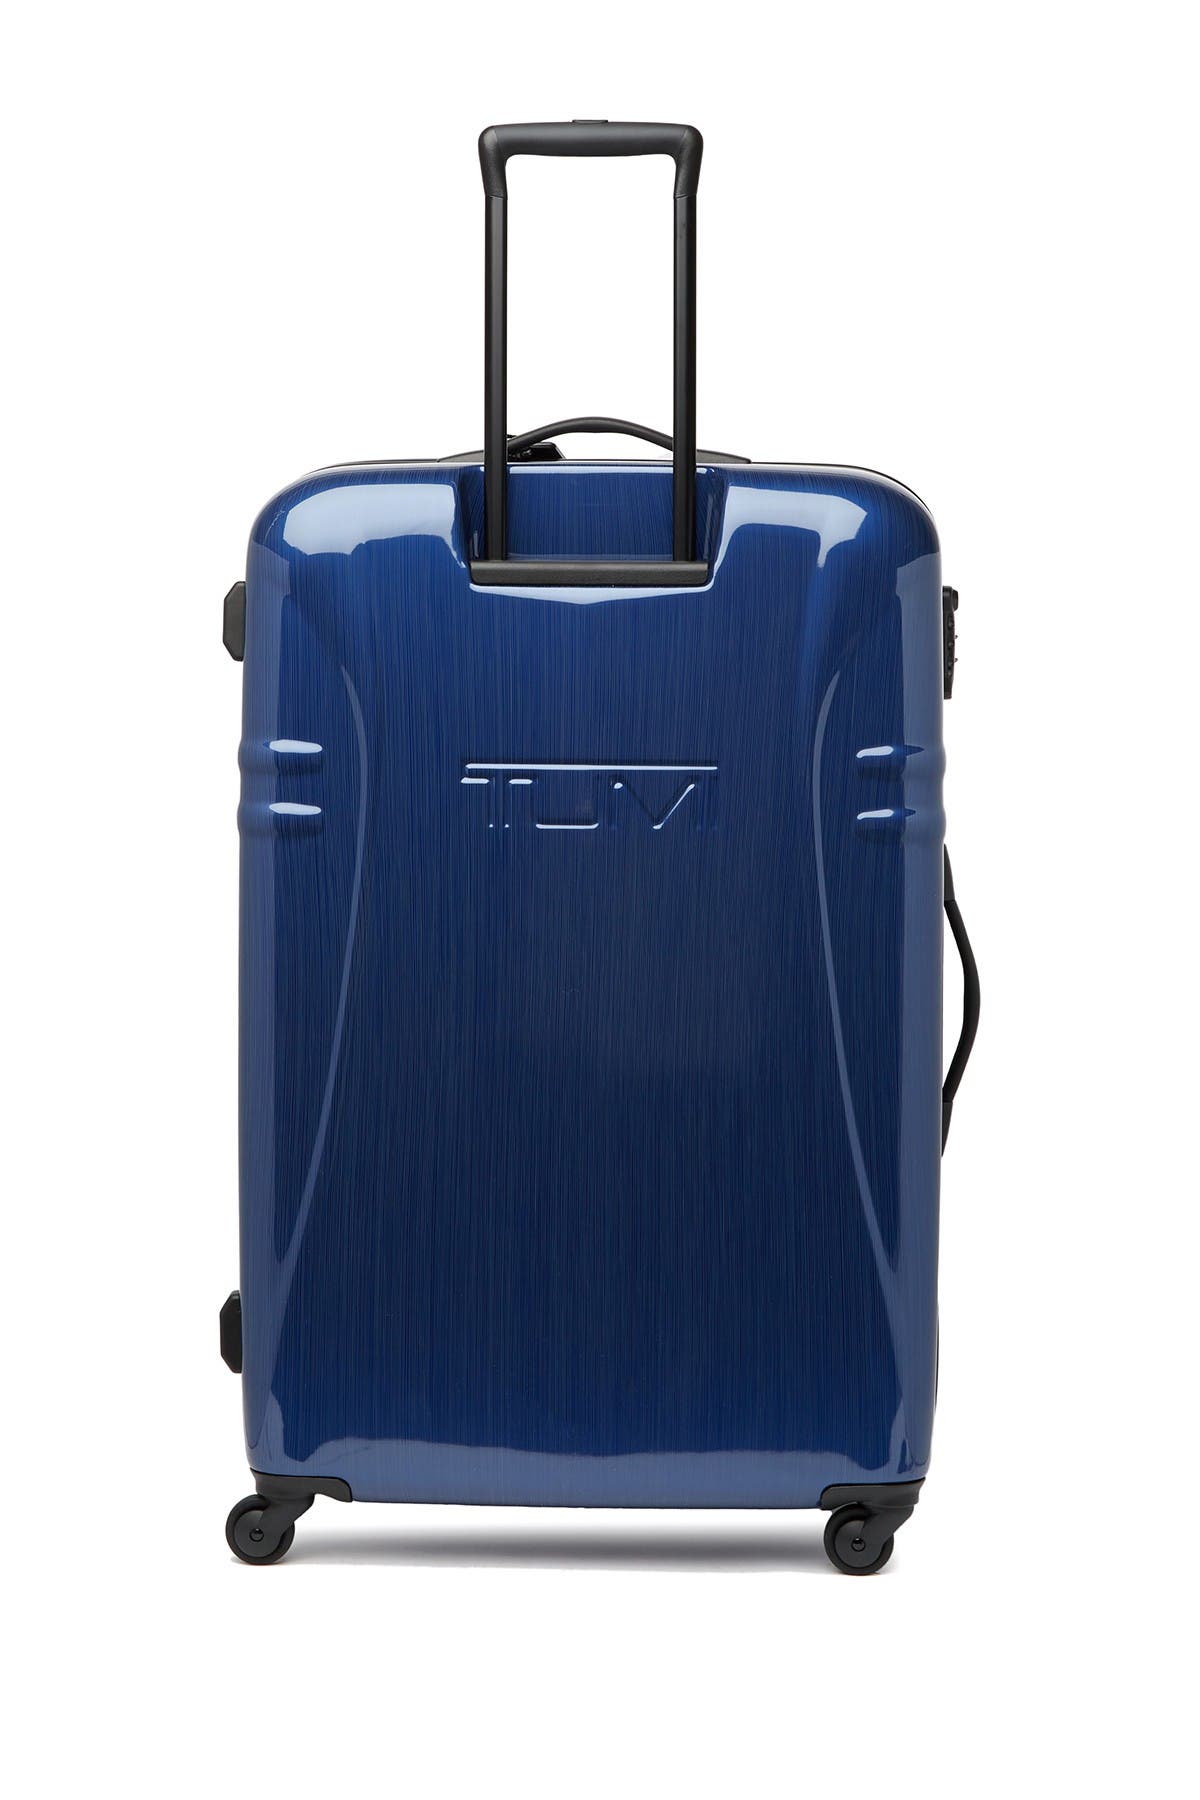 Tumi Extended Stay 33" Hardside Spinner Suitcase In Bright Blue1